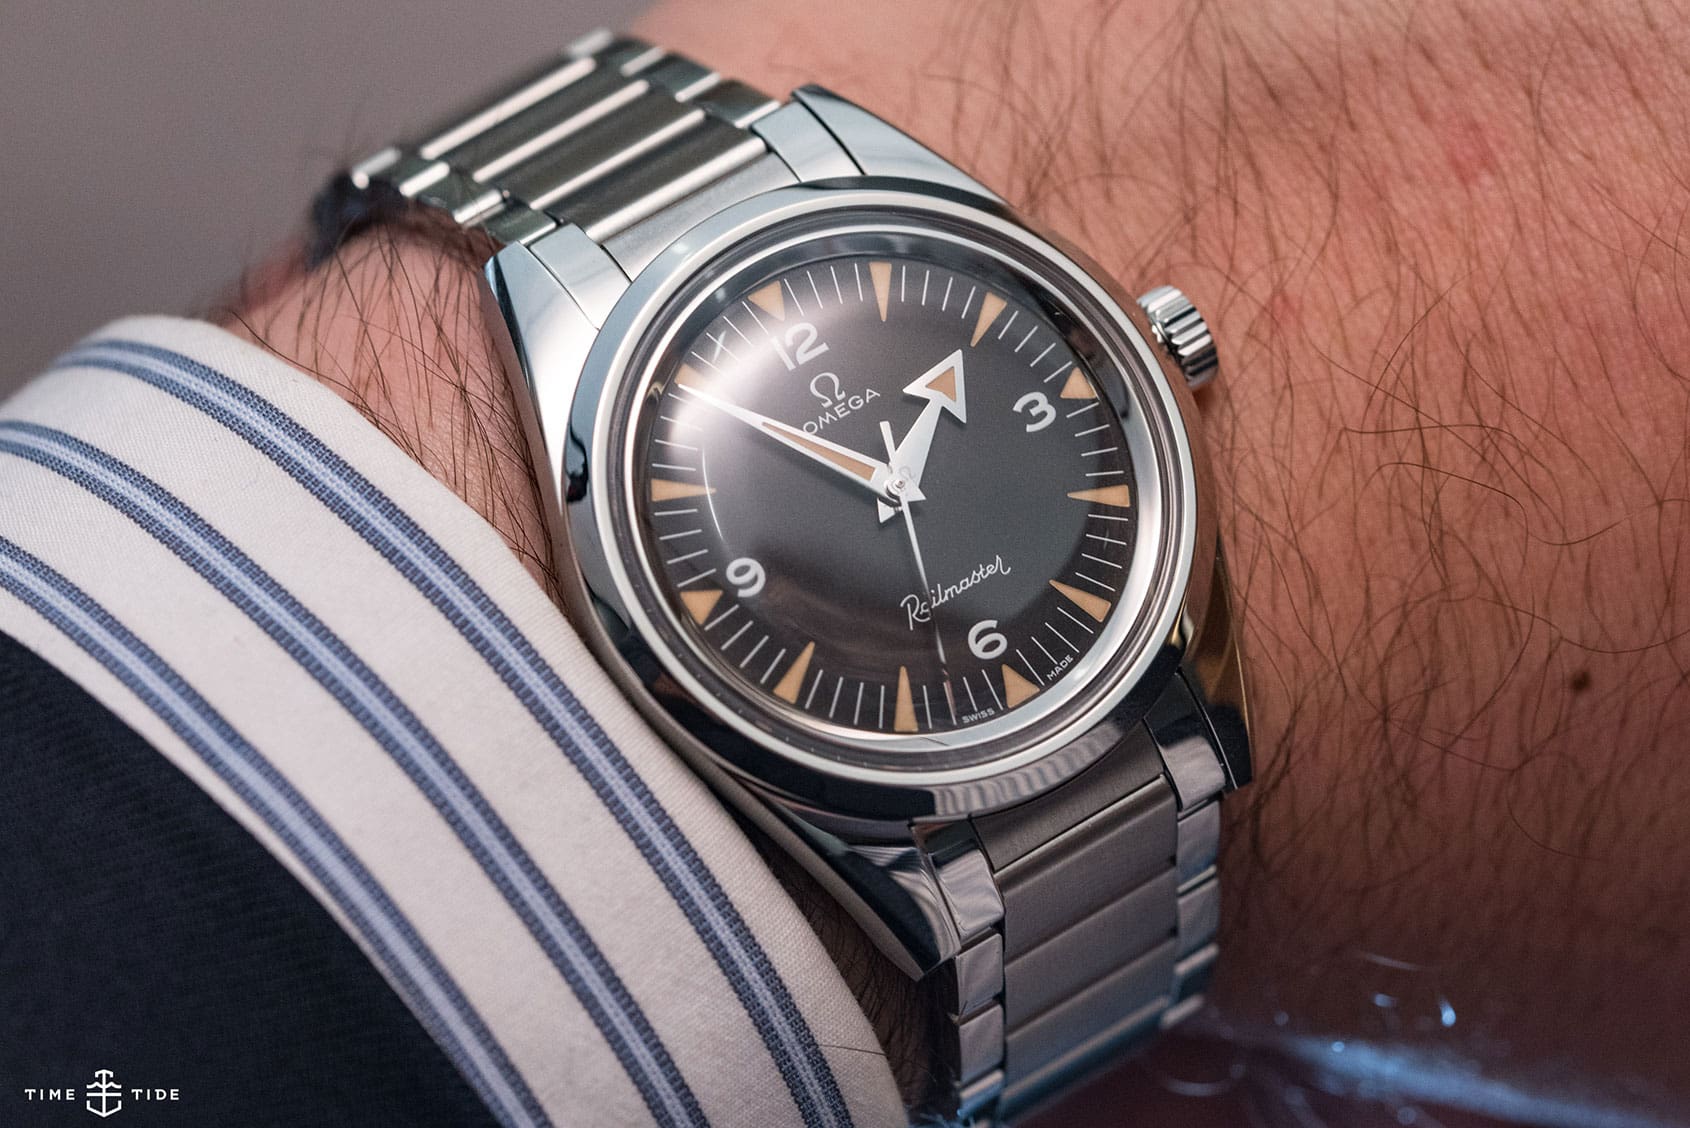 HANDS-ON: The Omega 1957 Trilogy Railmaster – better than the original?